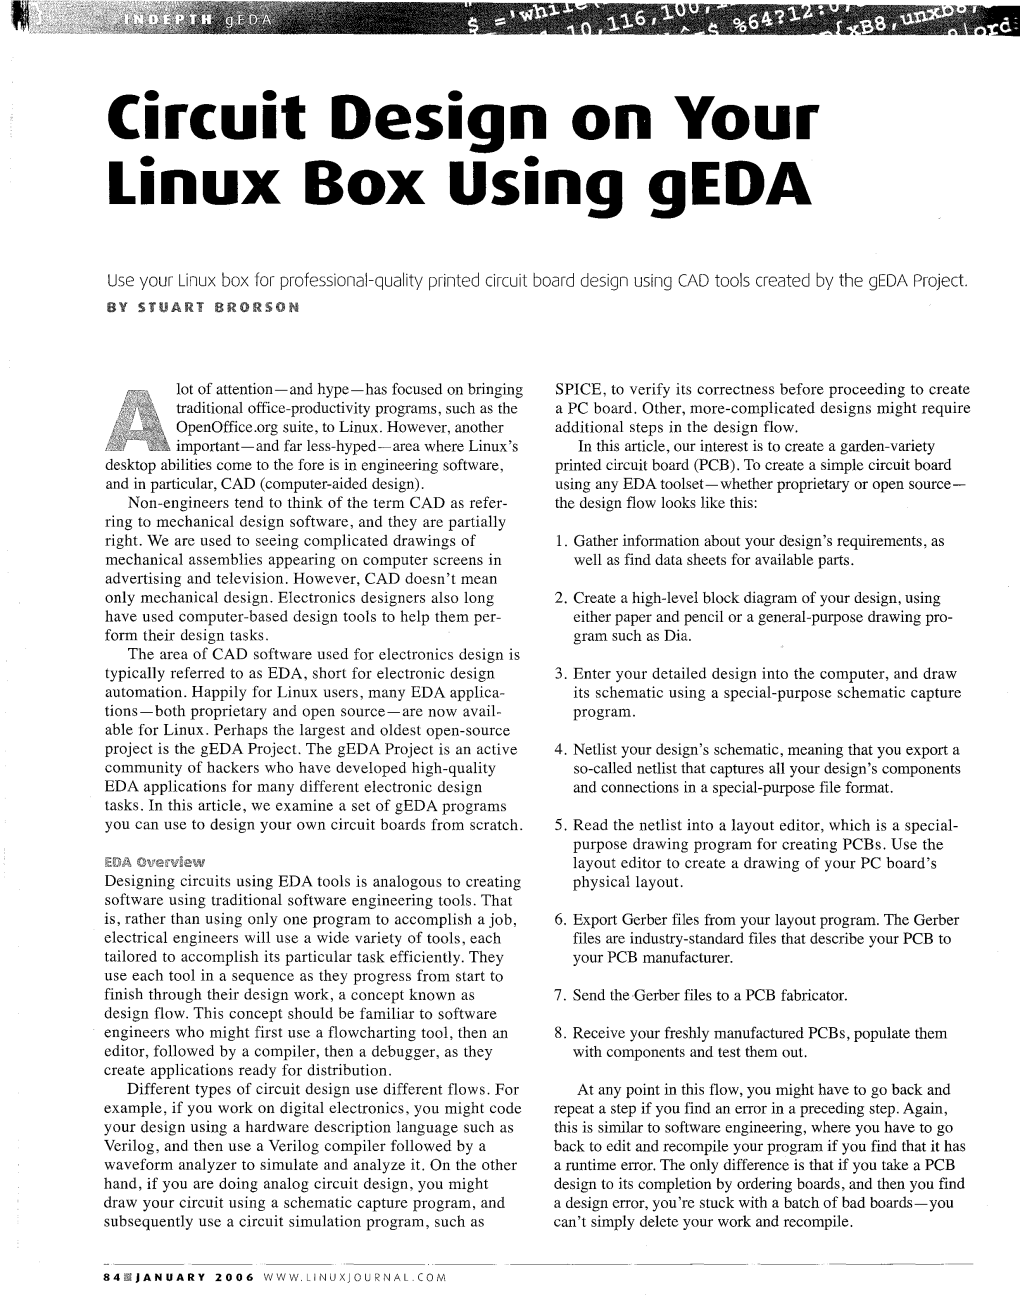 Circuit Design on Your Linux Box Using Geda